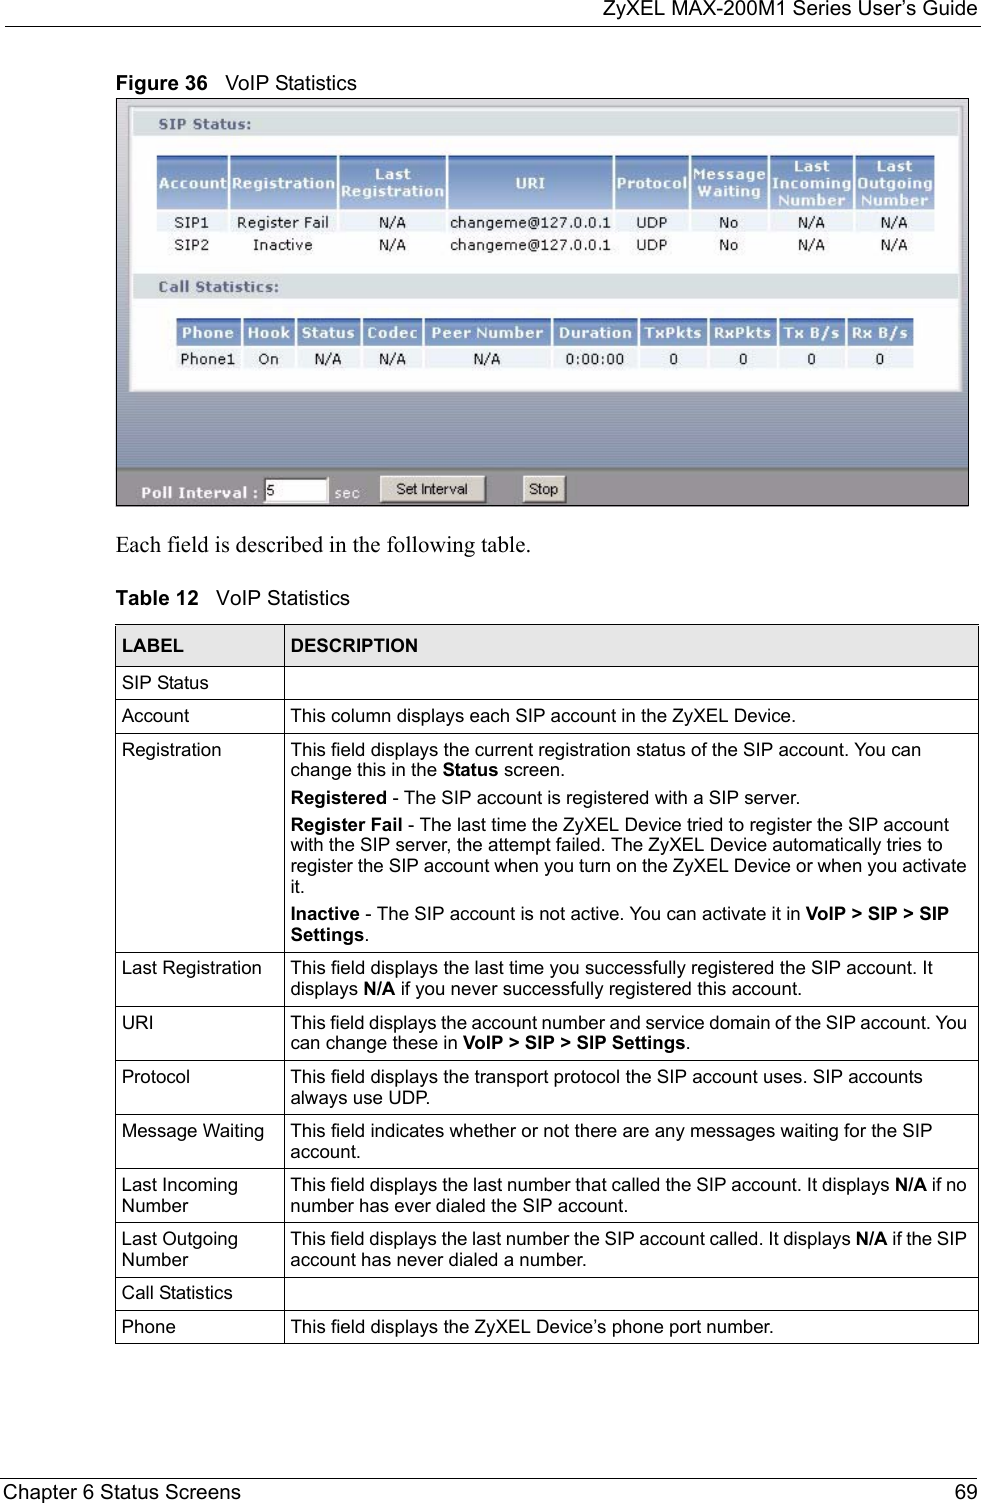 ZyXEL MAX-200M1 Series User’s GuideChapter 6 Status Screens 69Figure 36   VoIP StatisticsEach field is described in the following table.Table 12   VoIP Statistics LABEL DESCRIPTIONSIP StatusAccount This column displays each SIP account in the ZyXEL Device.Registration This field displays the current registration status of the SIP account. You can change this in the Status screen.Registered - The SIP account is registered with a SIP server.Register Fail - The last time the ZyXEL Device tried to register the SIP account with the SIP server, the attempt failed. The ZyXEL Device automatically tries to register the SIP account when you turn on the ZyXEL Device or when you activate it.Inactive - The SIP account is not active. You can activate it in VoIP &gt; SIP &gt; SIP Settings.Last Registration This field displays the last time you successfully registered the SIP account. It displays N/A if you never successfully registered this account.URI This field displays the account number and service domain of the SIP account. You can change these in VoIP &gt; SIP &gt; SIP Settings.Protocol This field displays the transport protocol the SIP account uses. SIP accounts always use UDP.Message Waiting This field indicates whether or not there are any messages waiting for the SIP account.Last Incoming NumberThis field displays the last number that called the SIP account. It displays N/A if no number has ever dialed the SIP account.Last Outgoing NumberThis field displays the last number the SIP account called. It displays N/A if the SIP account has never dialed a number.Call StatisticsPhone This field displays the ZyXEL Device’s phone port number.